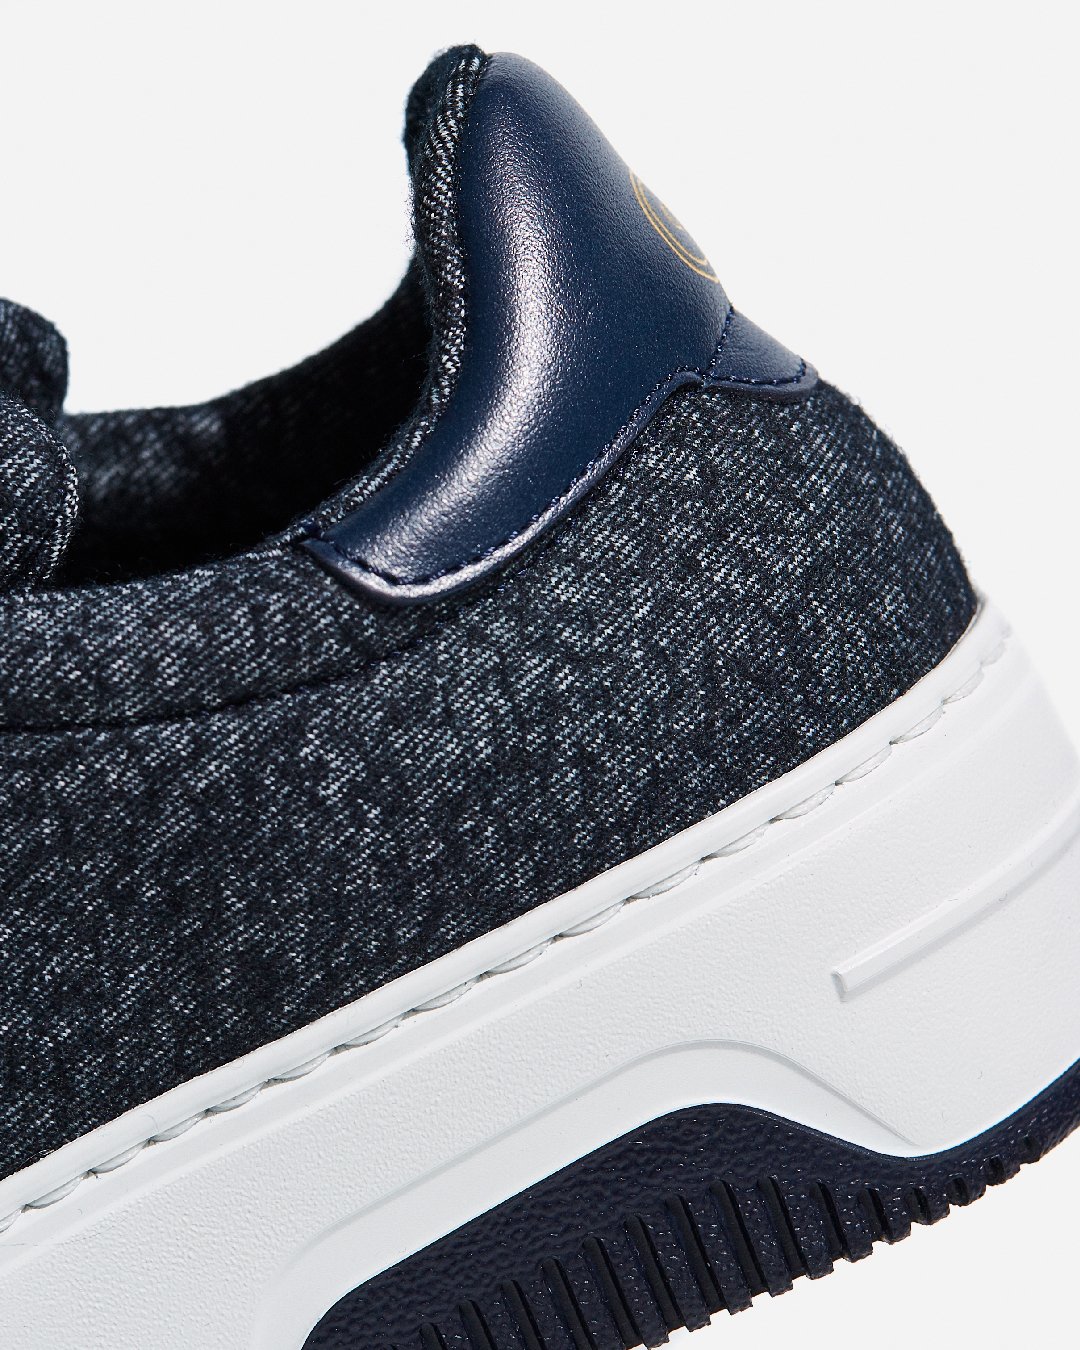 New Breathable/Dry Sneaker By Reda Active Merino Wool | Fabiboutique